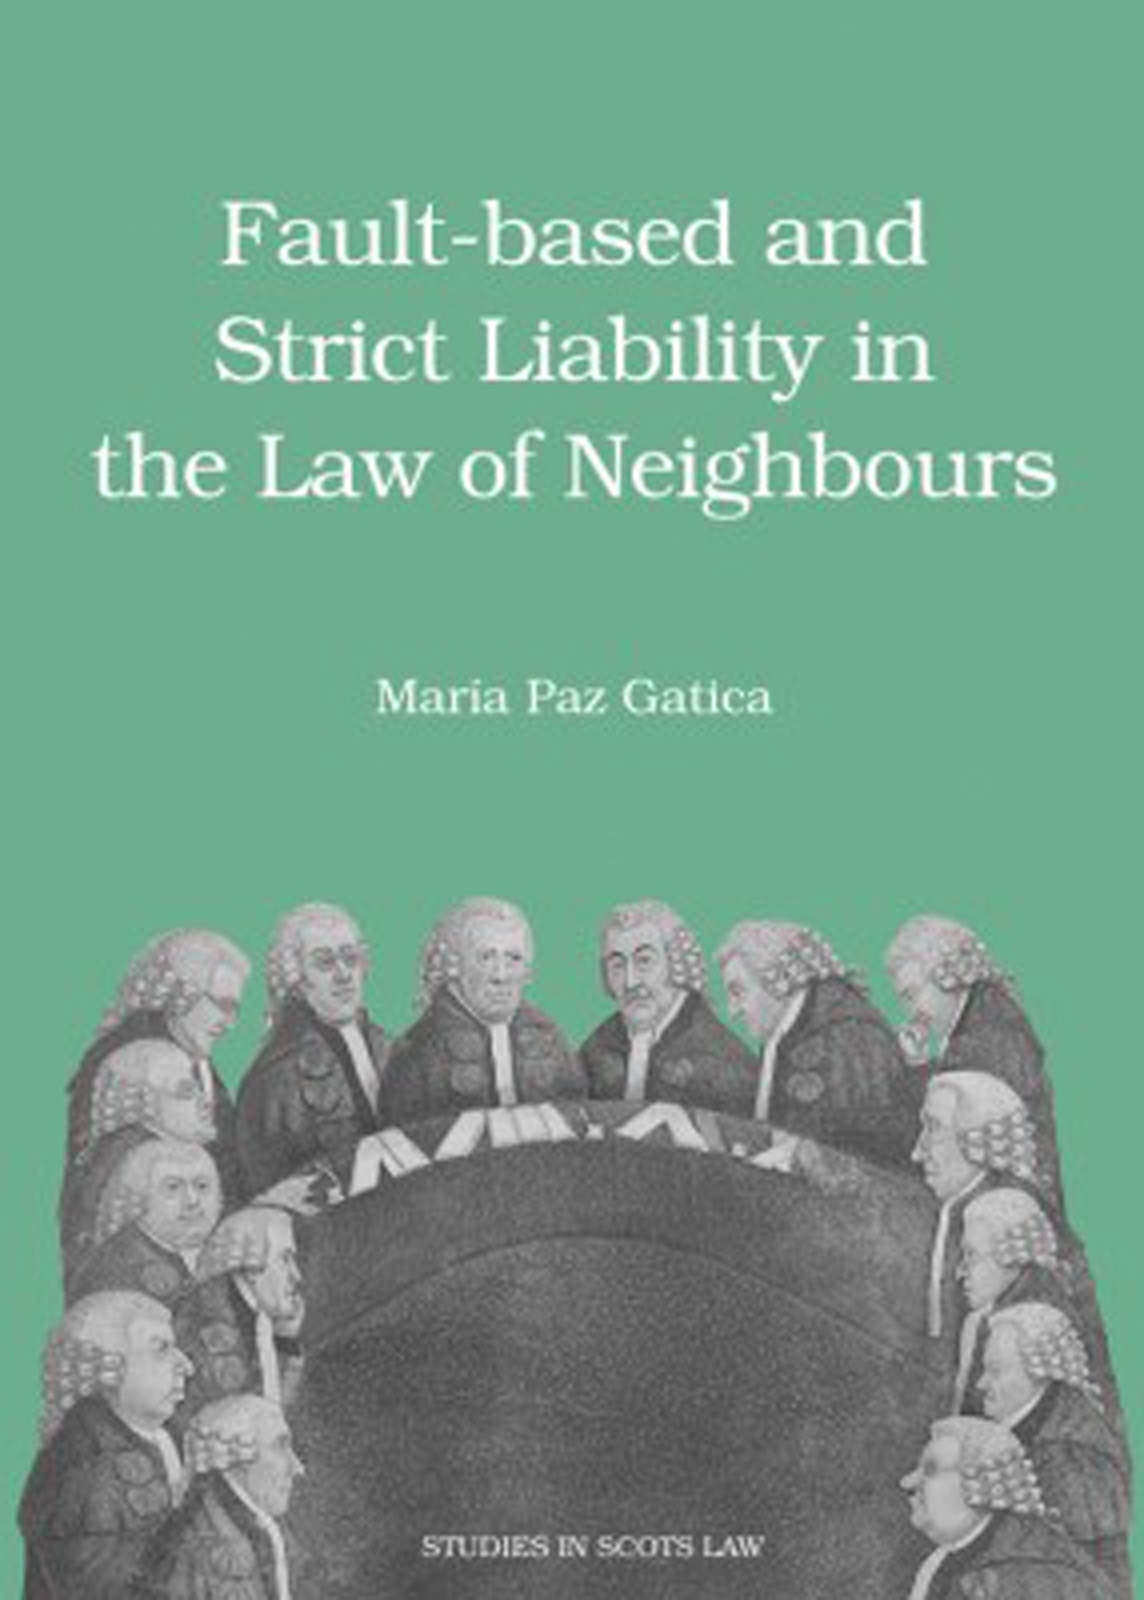 Cover, Fault-based and Strict Liability in the Law of Neighbours, Maria Paz Gatica